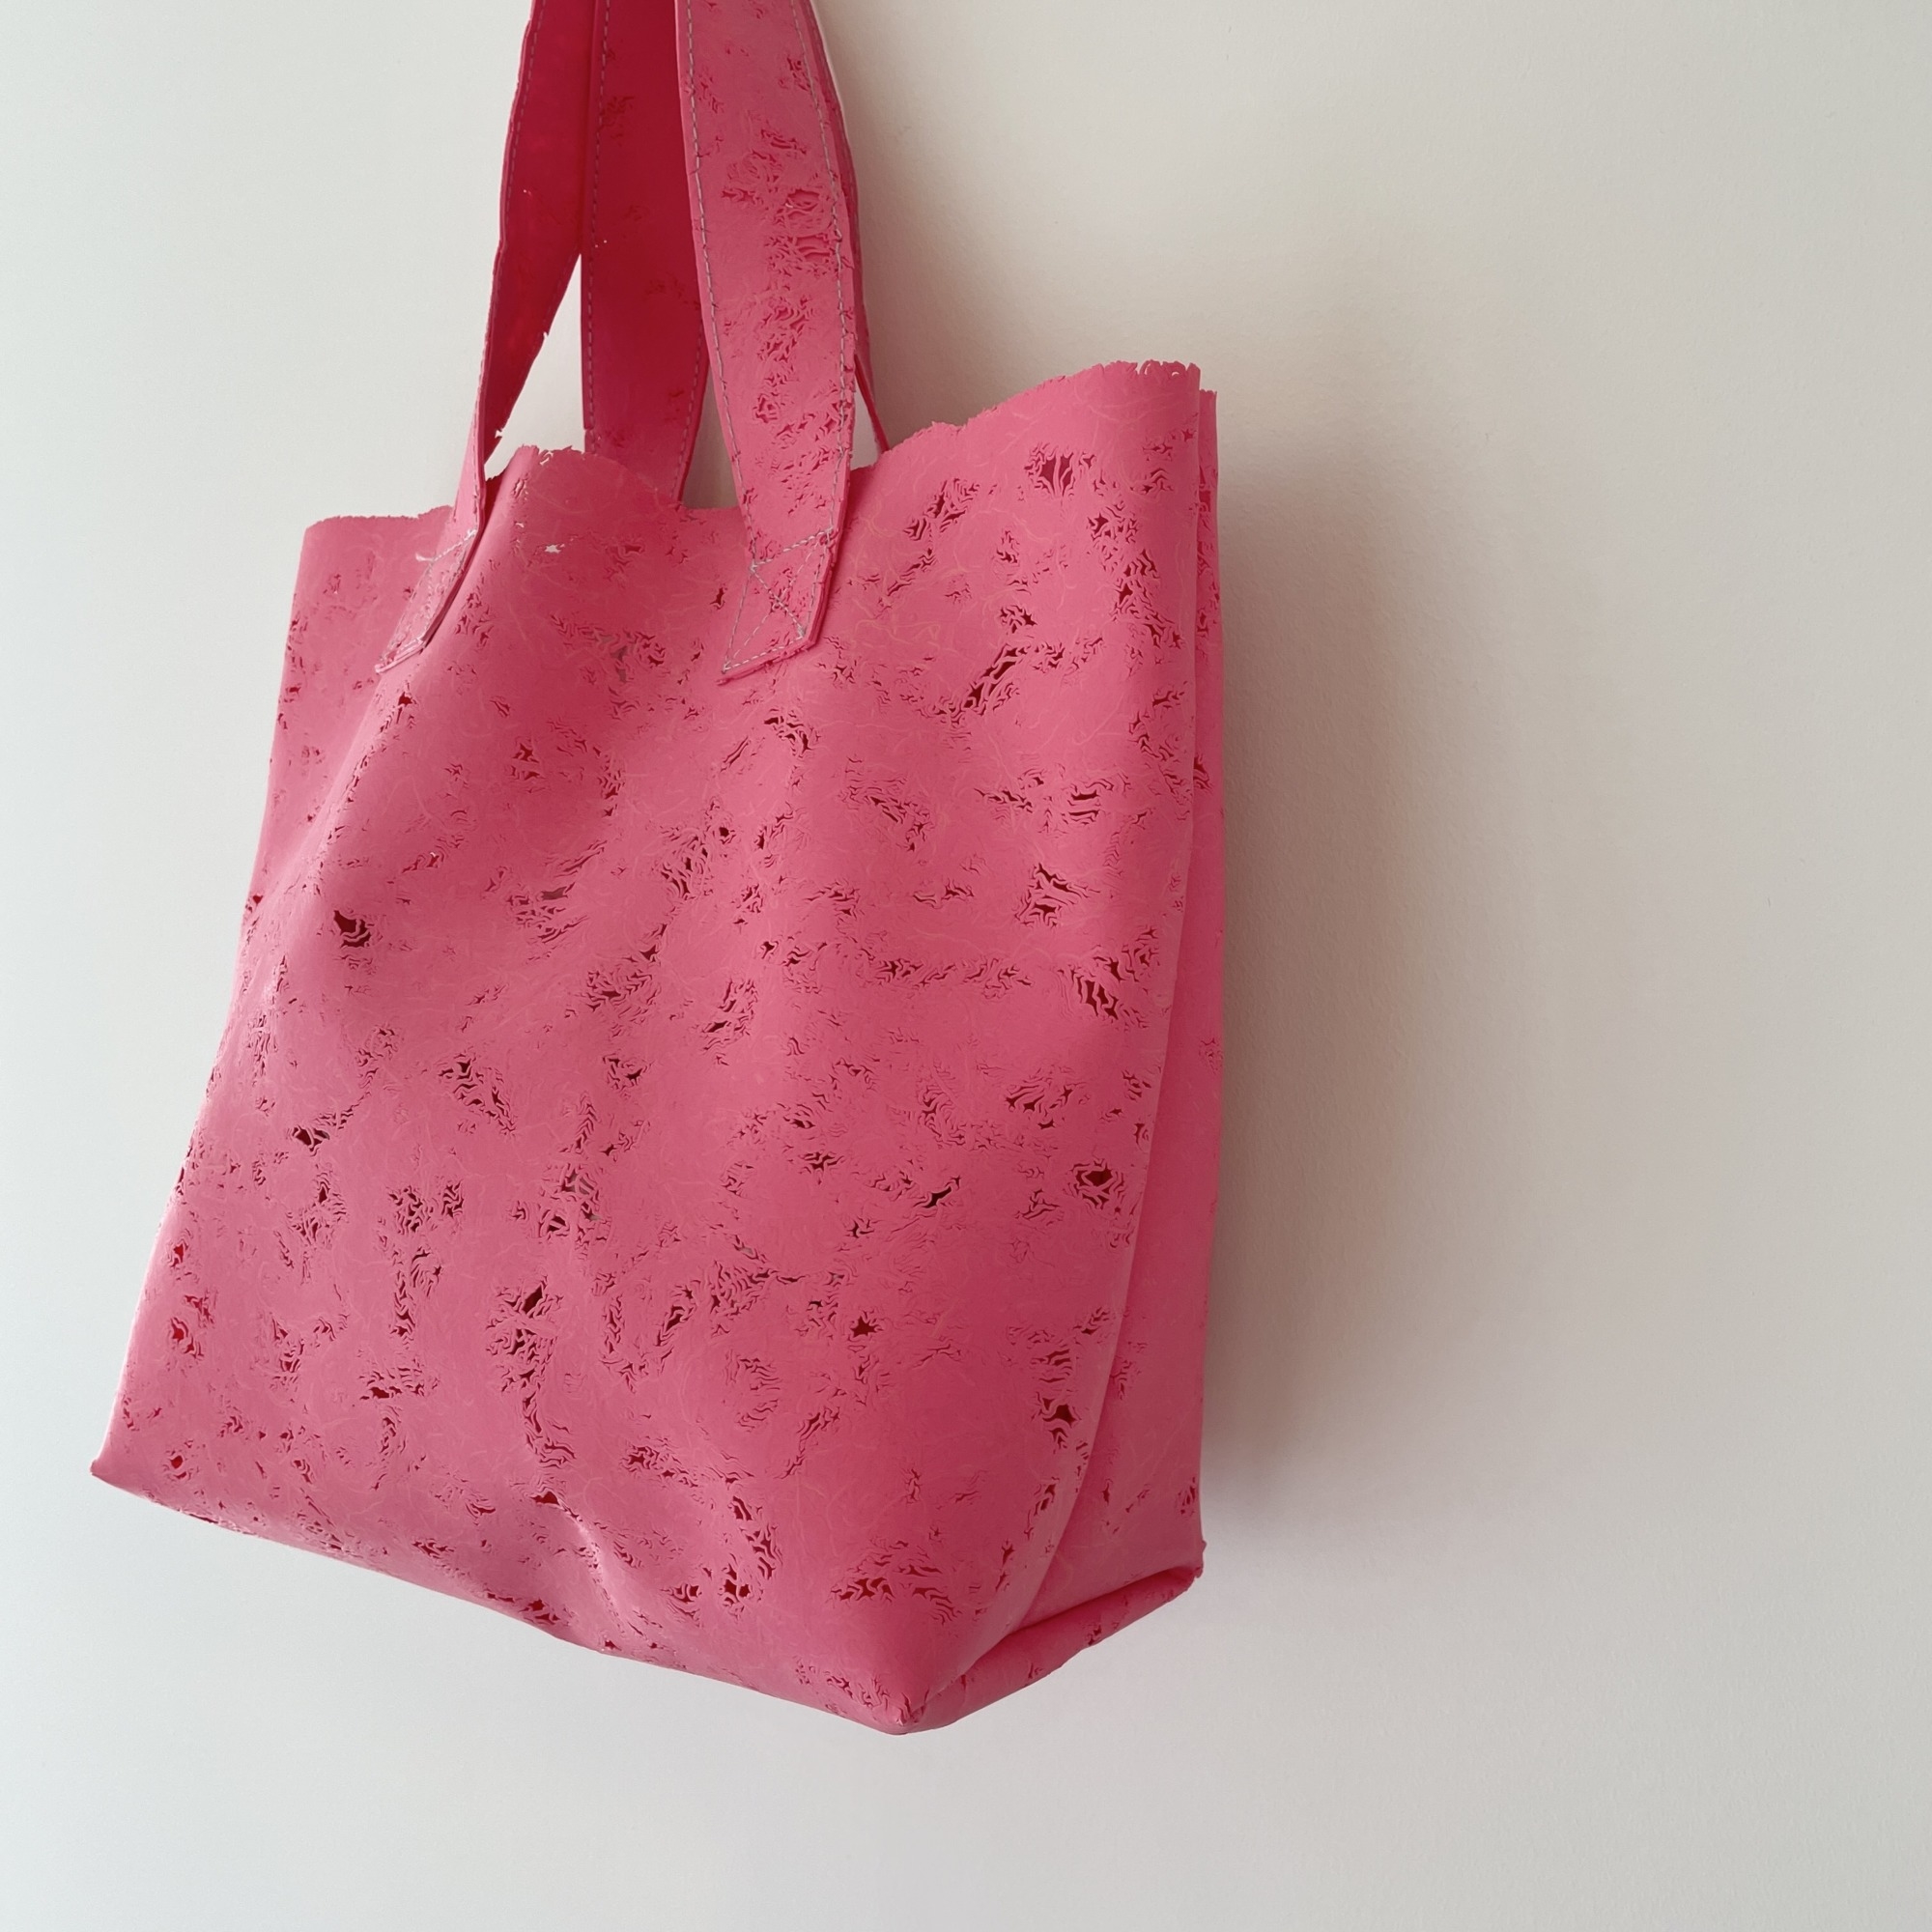 LUISA CEVESE RIEDIZIONI ＜SALE＞ SMALL SQUARE BAG – LARGE HANDLES / PINK